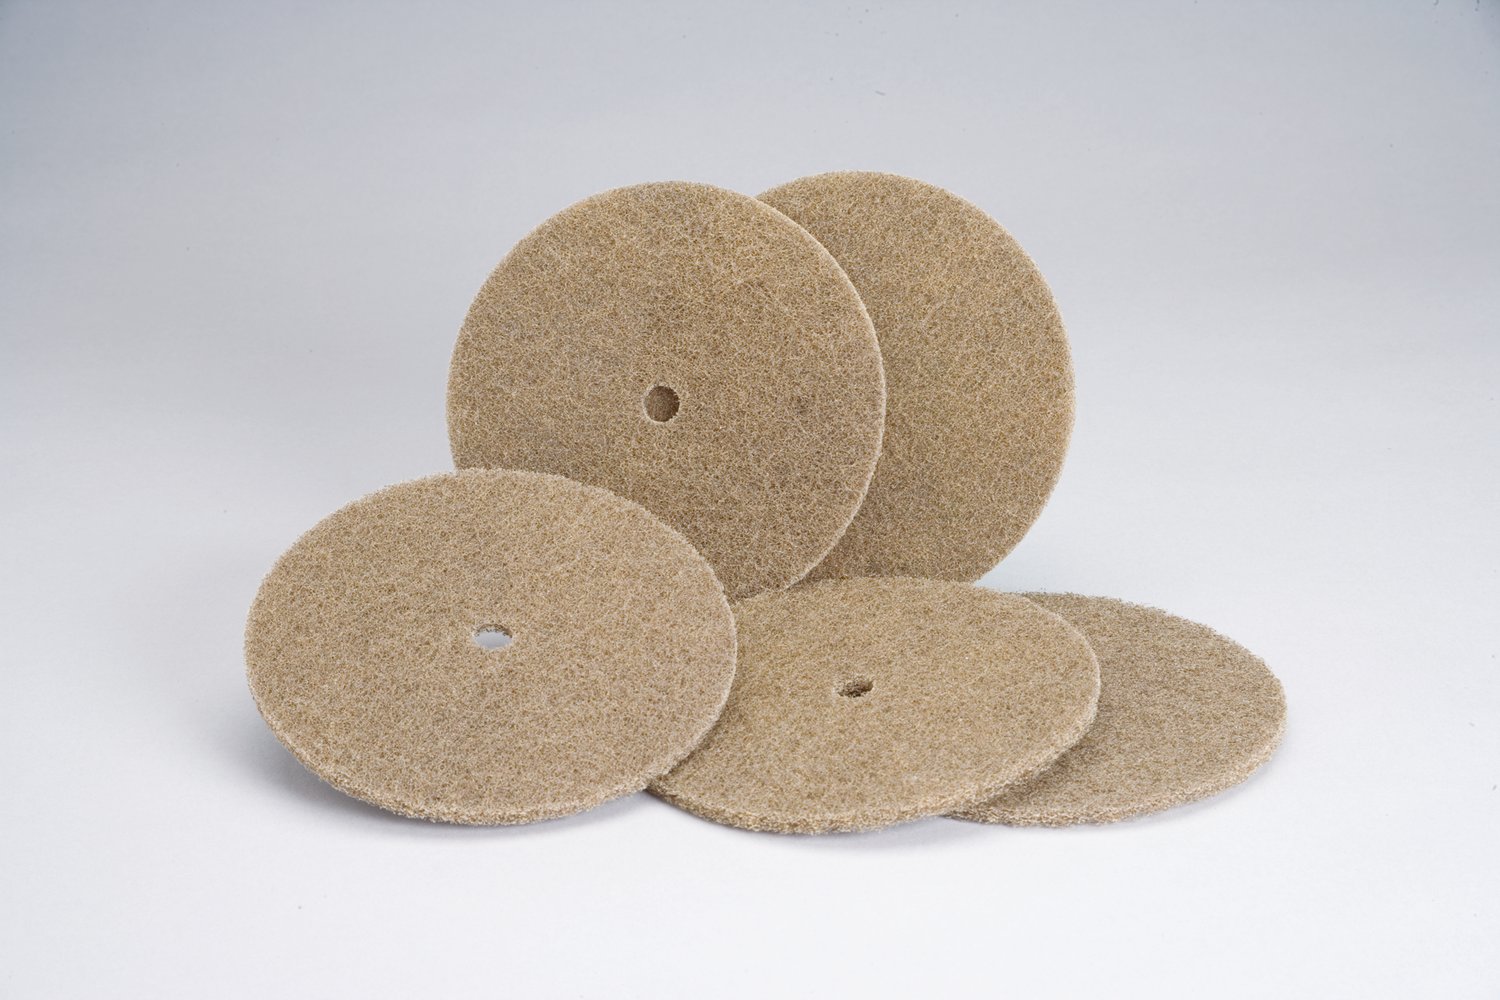 7010368522 - Standard Abrasives Buff and Blend AP Disc, 873310, 3 in x 1/4 in A MED,
25/Carton, 250 ea/Case